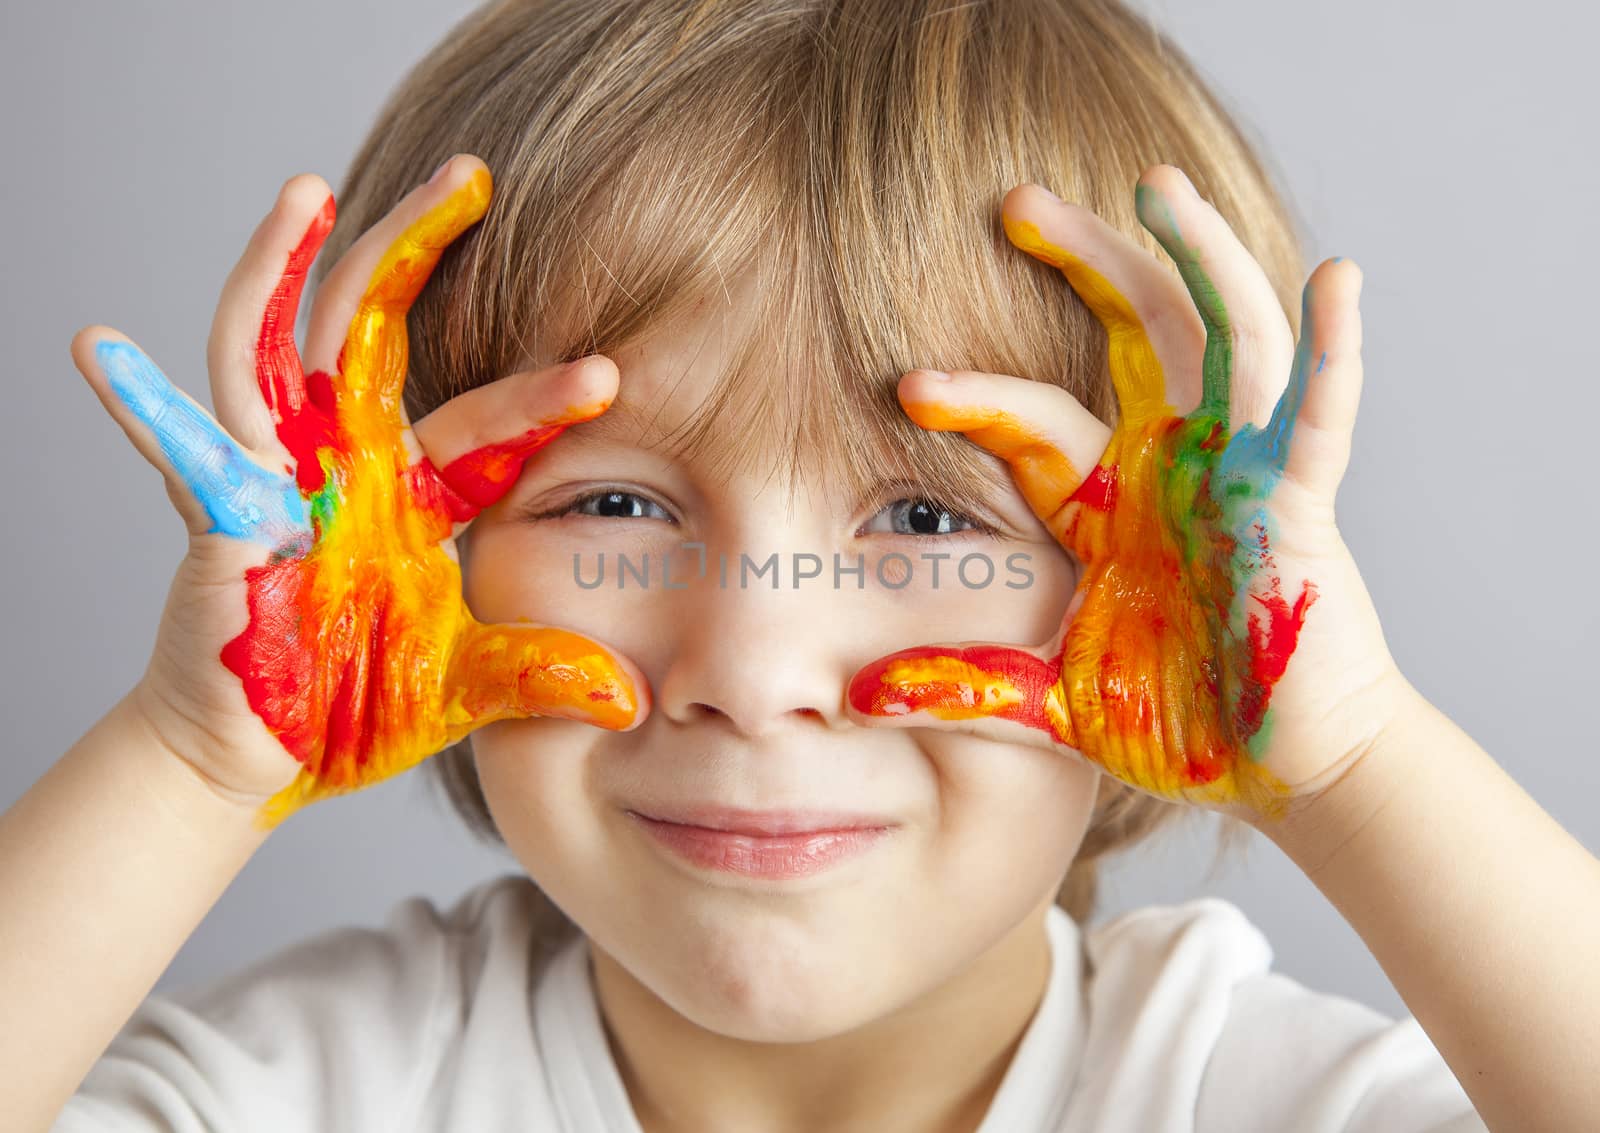 hands painted  in colorful paints by anelina